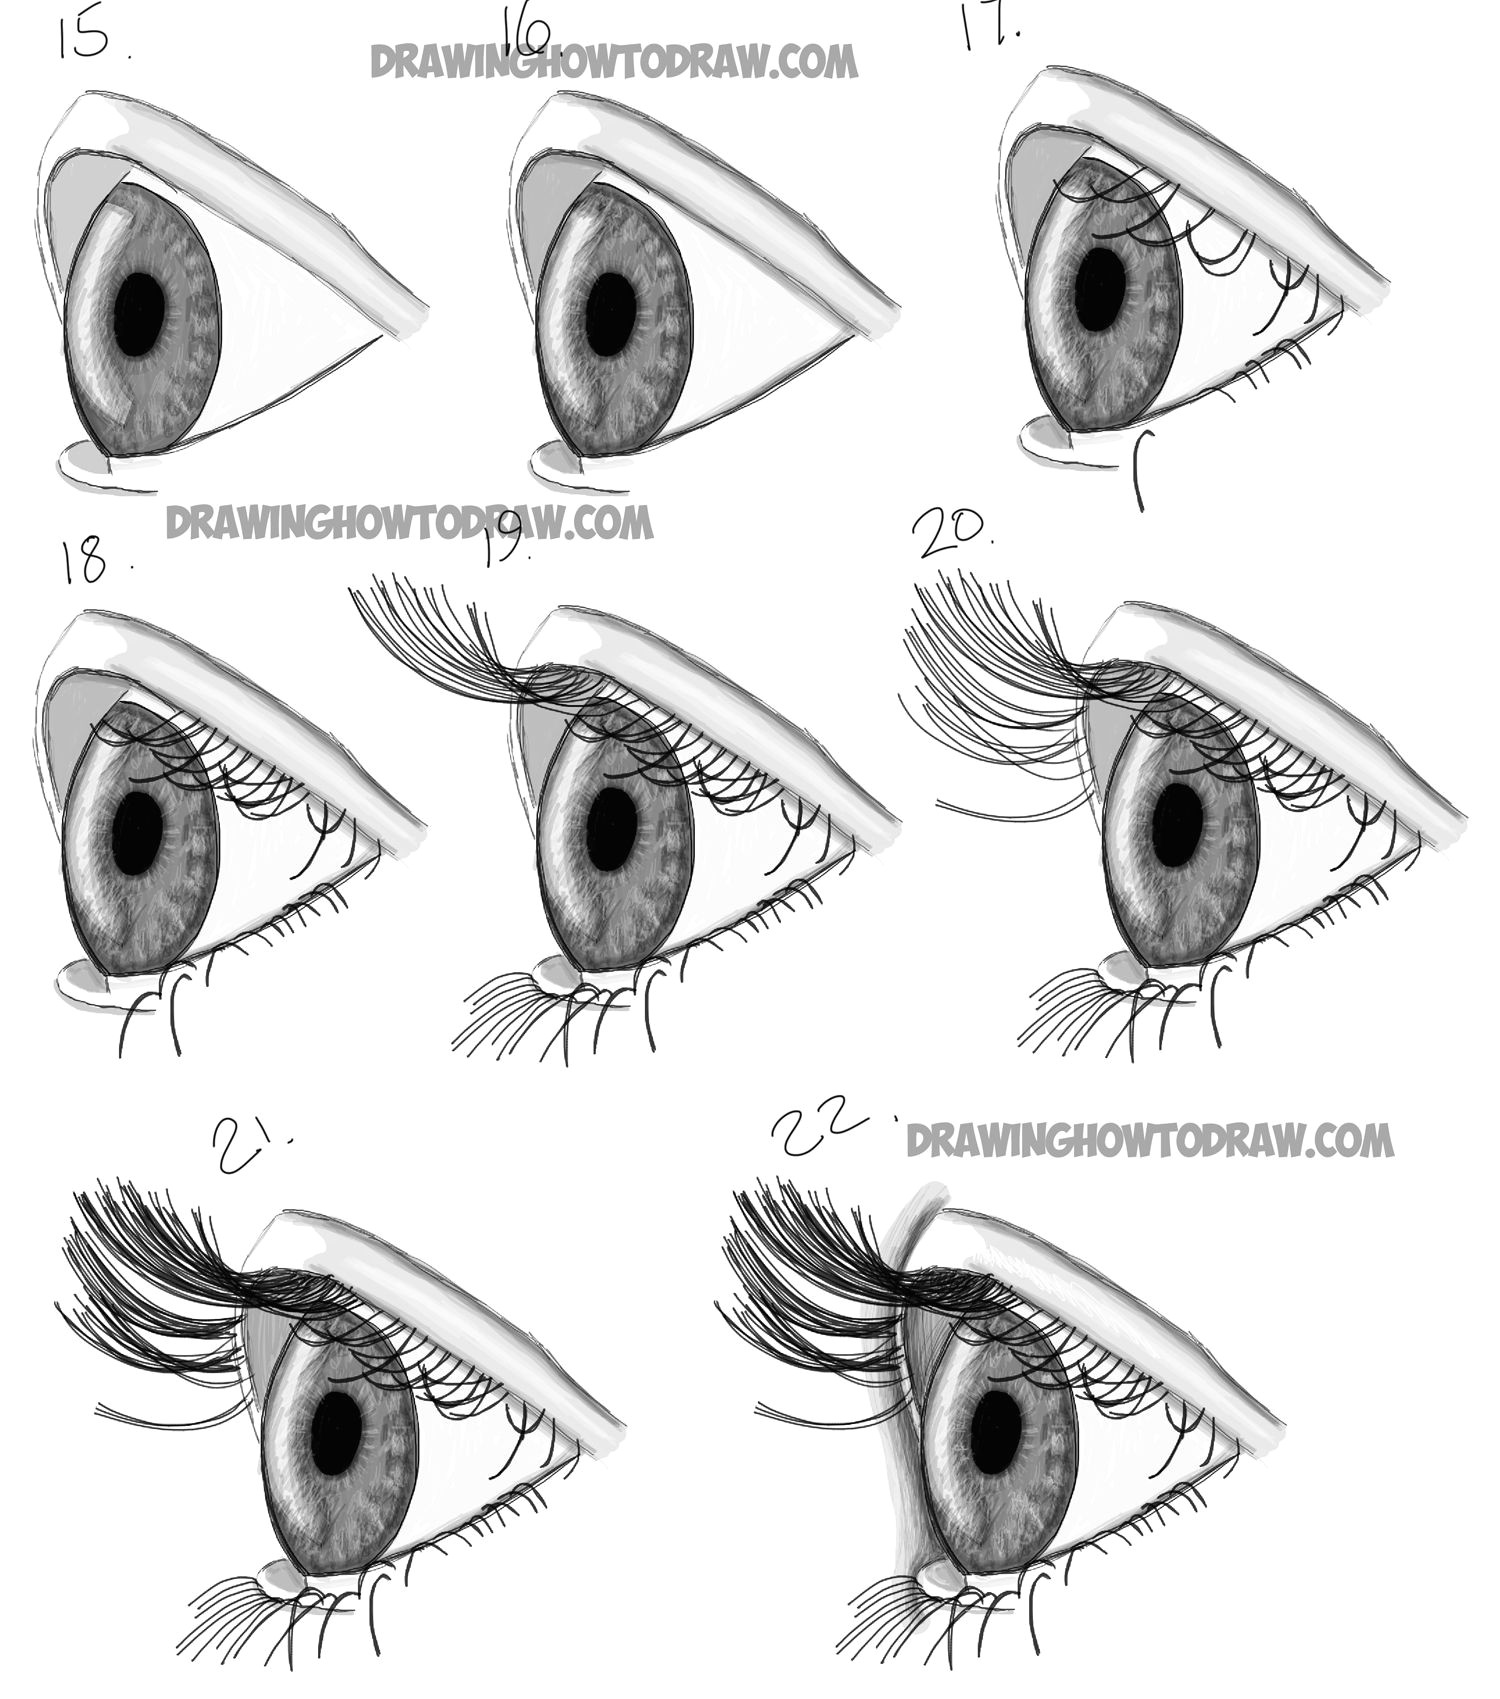 Drawing Eye Side View Step by Step How to Draw Realistic Eyes From the Side Profile View Step by Step